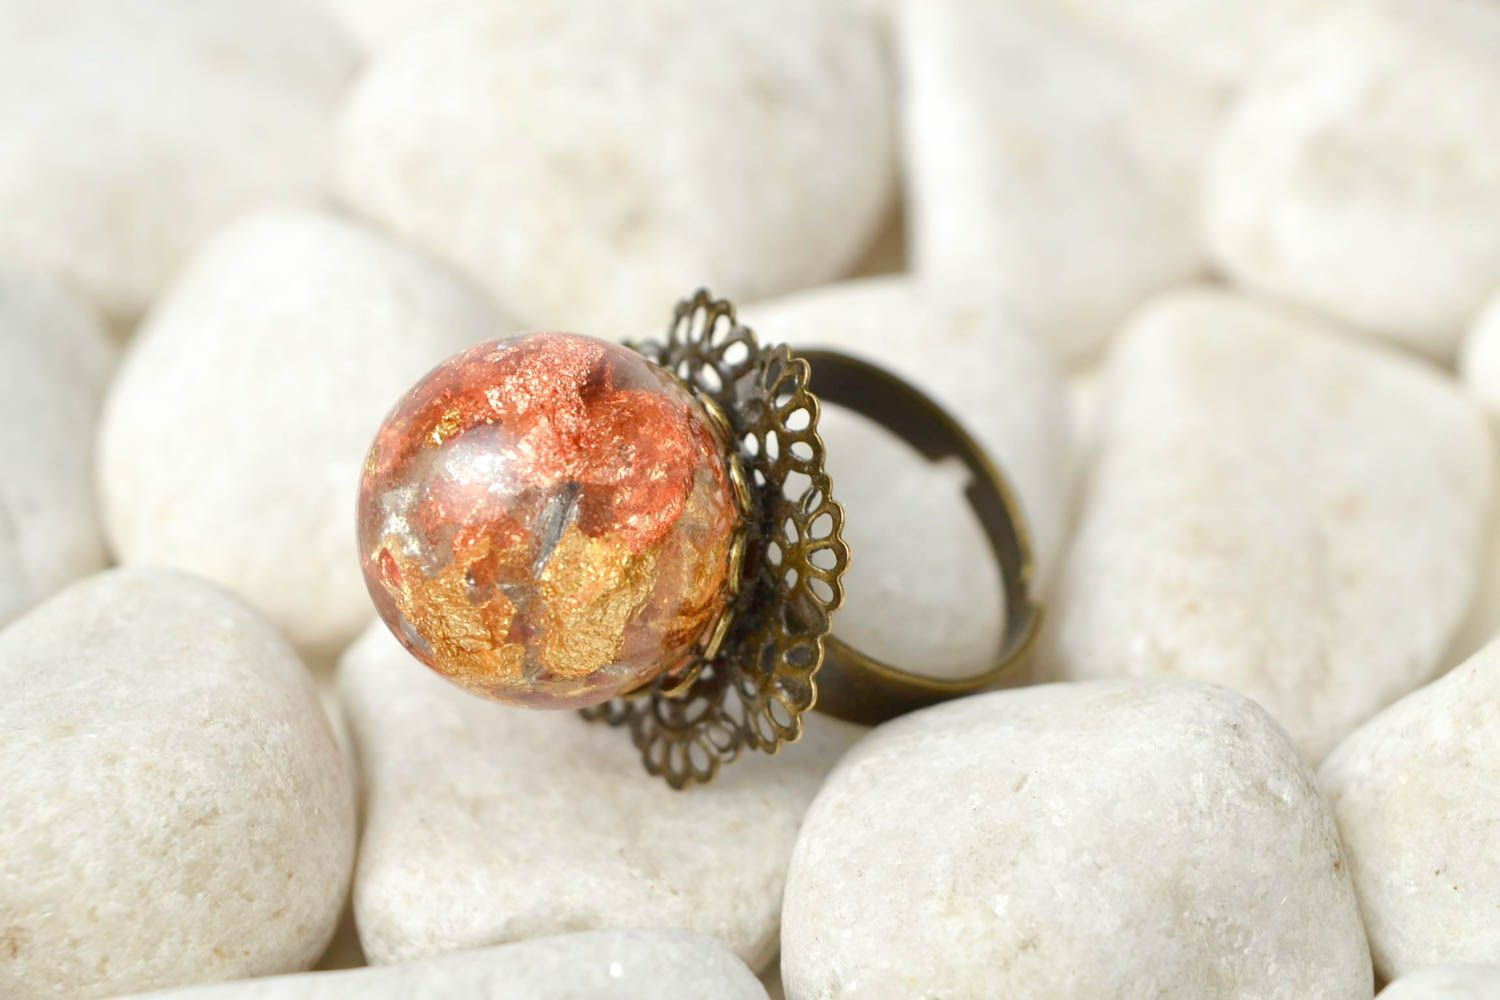 Handmade ring designer accessory gift ideas unusual jewelry gift for her photo 1